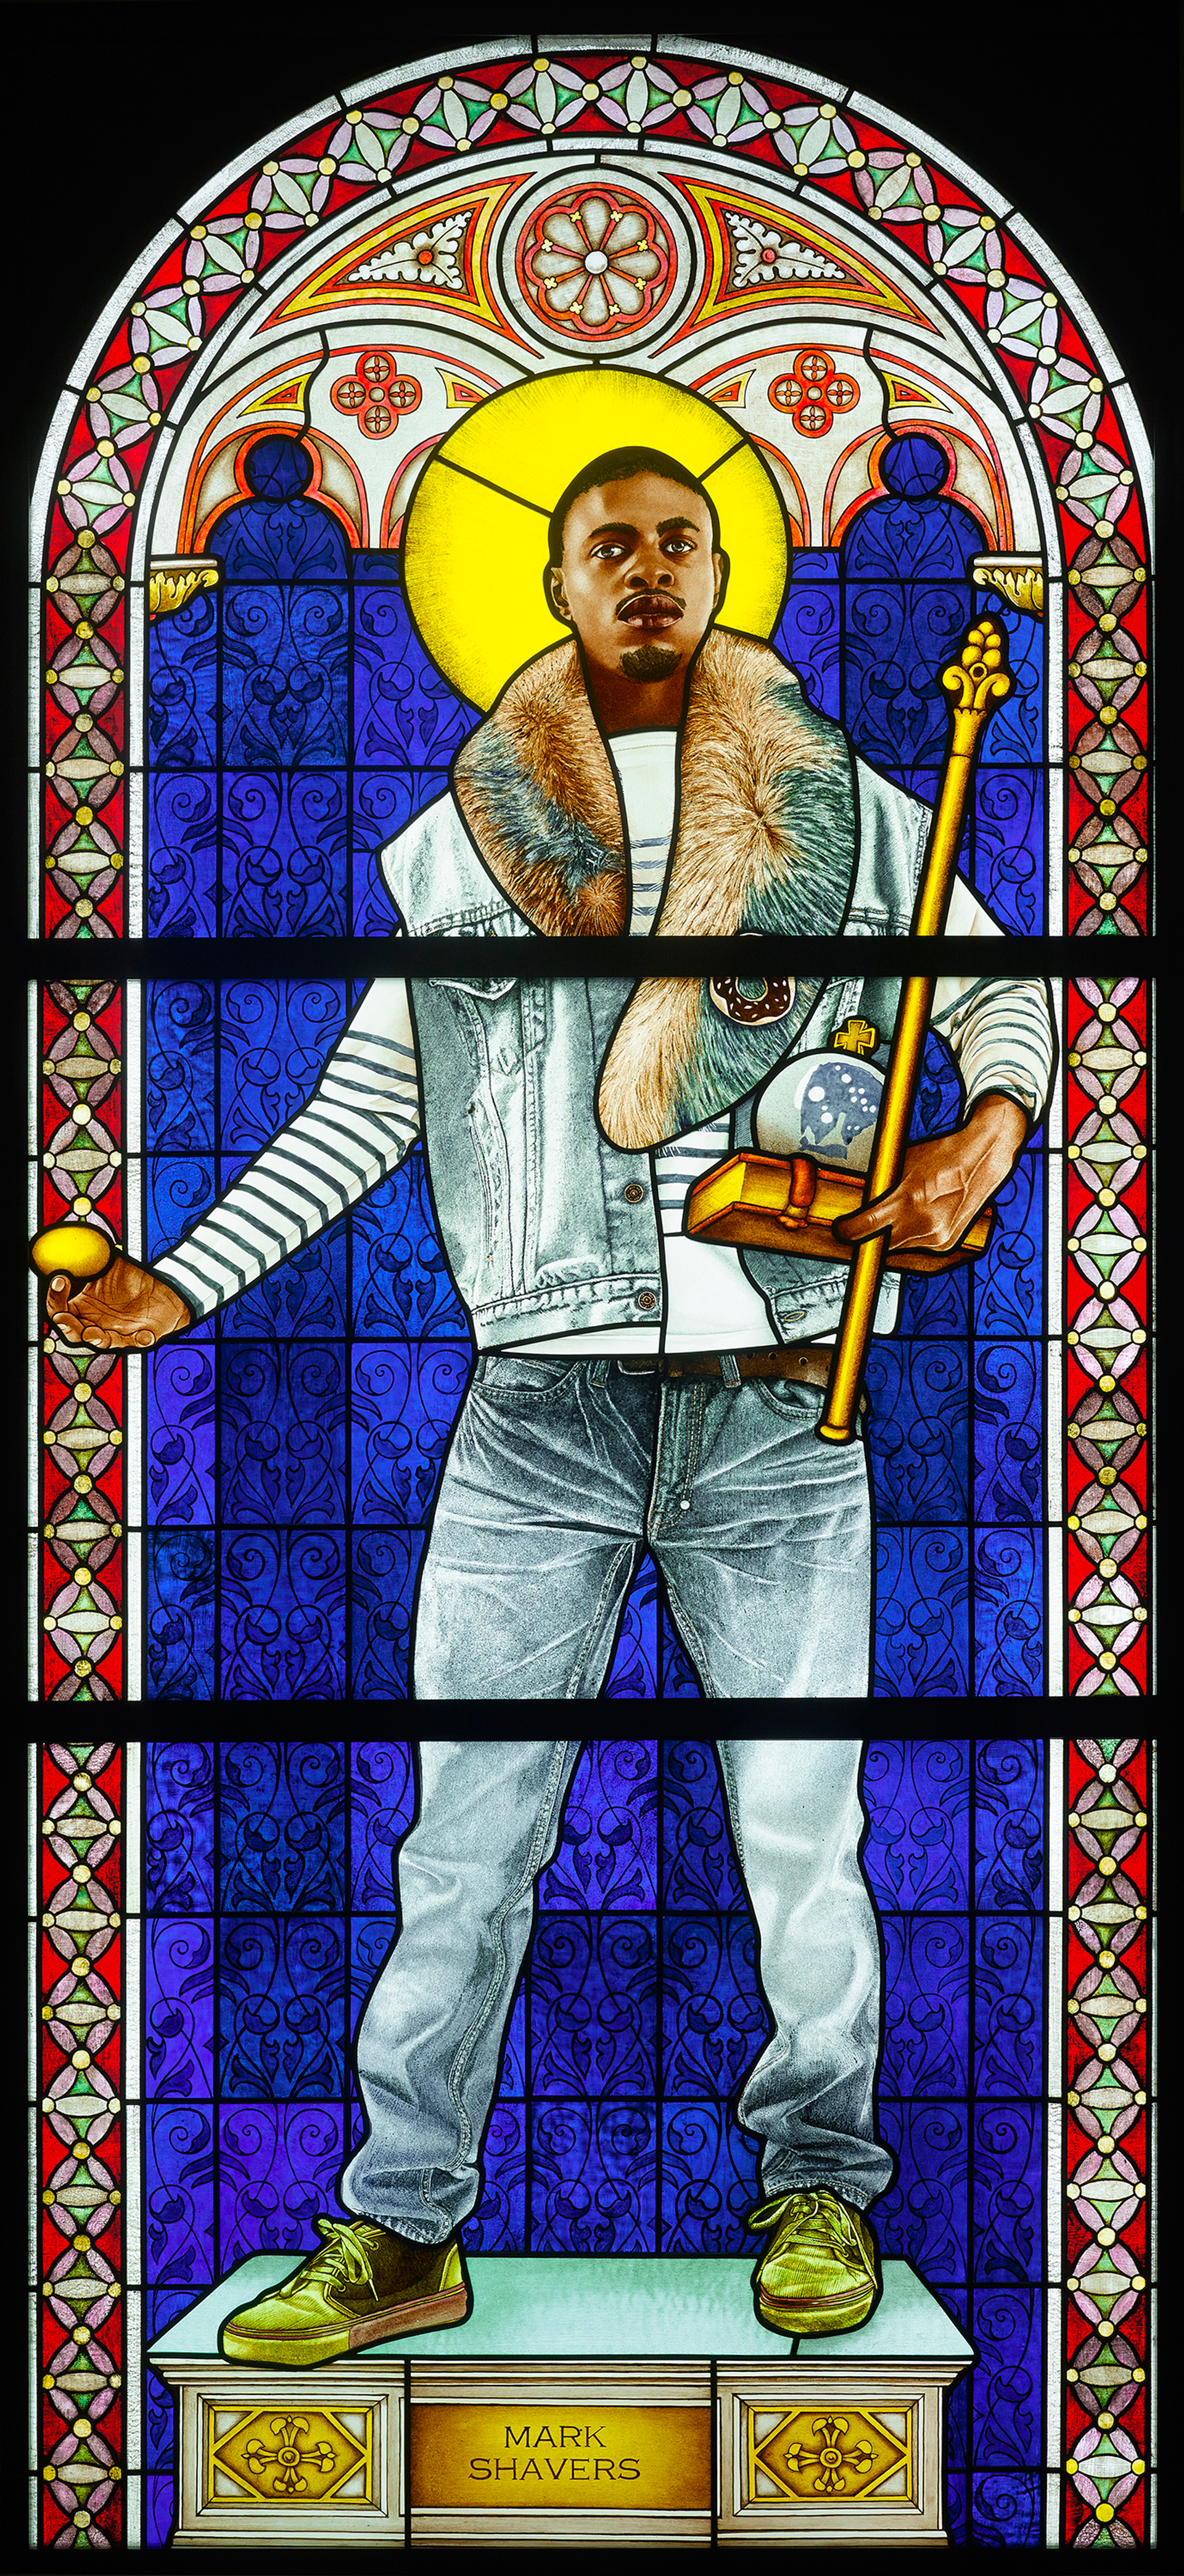 A triptych-style artwork, designed to resemble a stained glass altarpiece, portrays a black man standing on a raised platform in the middle panel. The platform is embellished with a gold plaque. The man is casually dressed, wearing denim jeans, a denim vest, and a blue long-sleeve striped shirt underneath. The background behind him is navy blue, with a golden circle positioned behind his head. The artwork is adorned with intricate red and green borders.